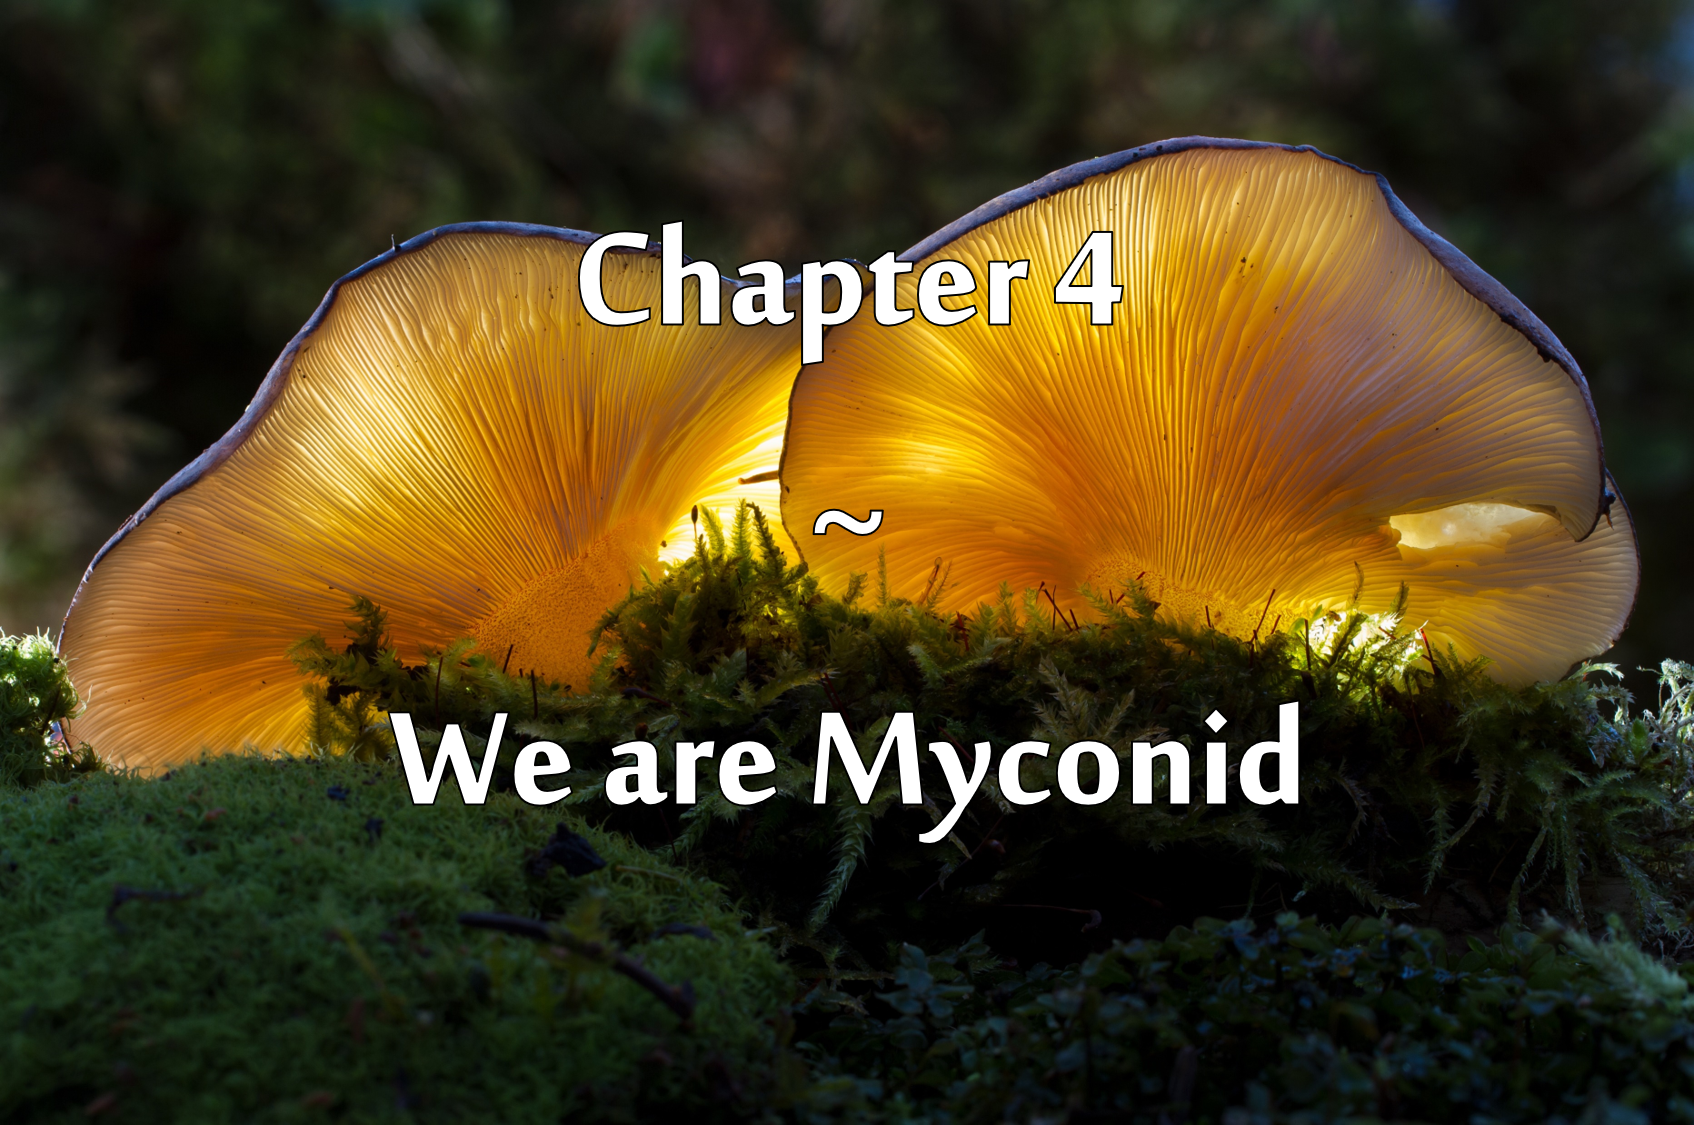 Two bright yellow mushrooms growing amidst moss